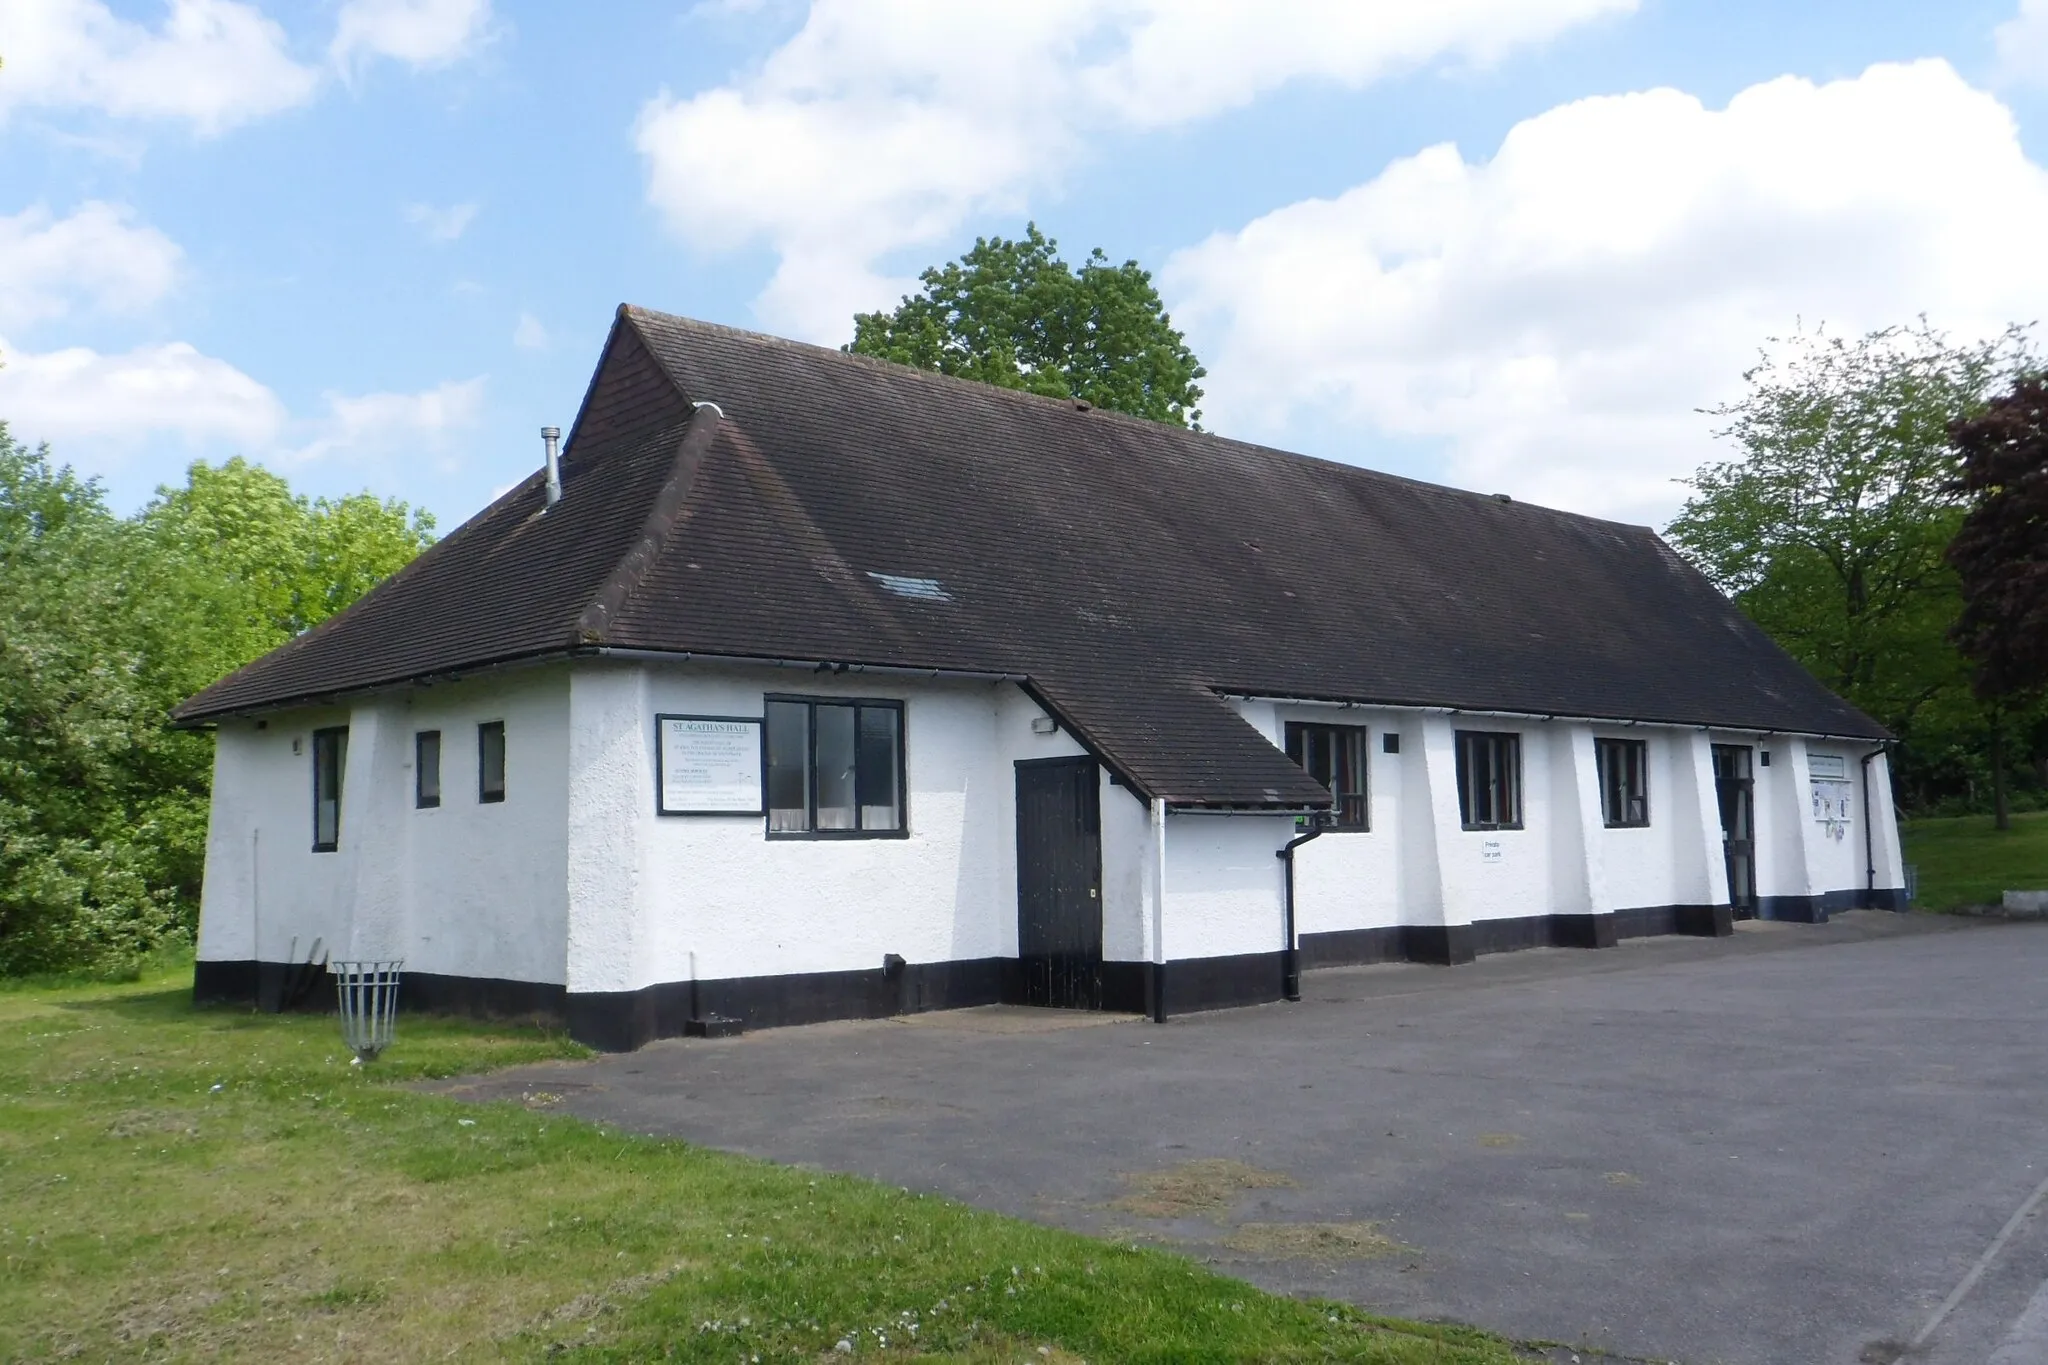 Photo showing: St Agatha's hall, Greenhurst Lane, Hurst Green, Surrey, England. This was the original Church of England church in Hurst Green until St John the Evangelist's parish church was built nearby. It was became the church hall, but was used for services again for a time when St John's was damaged by fire.